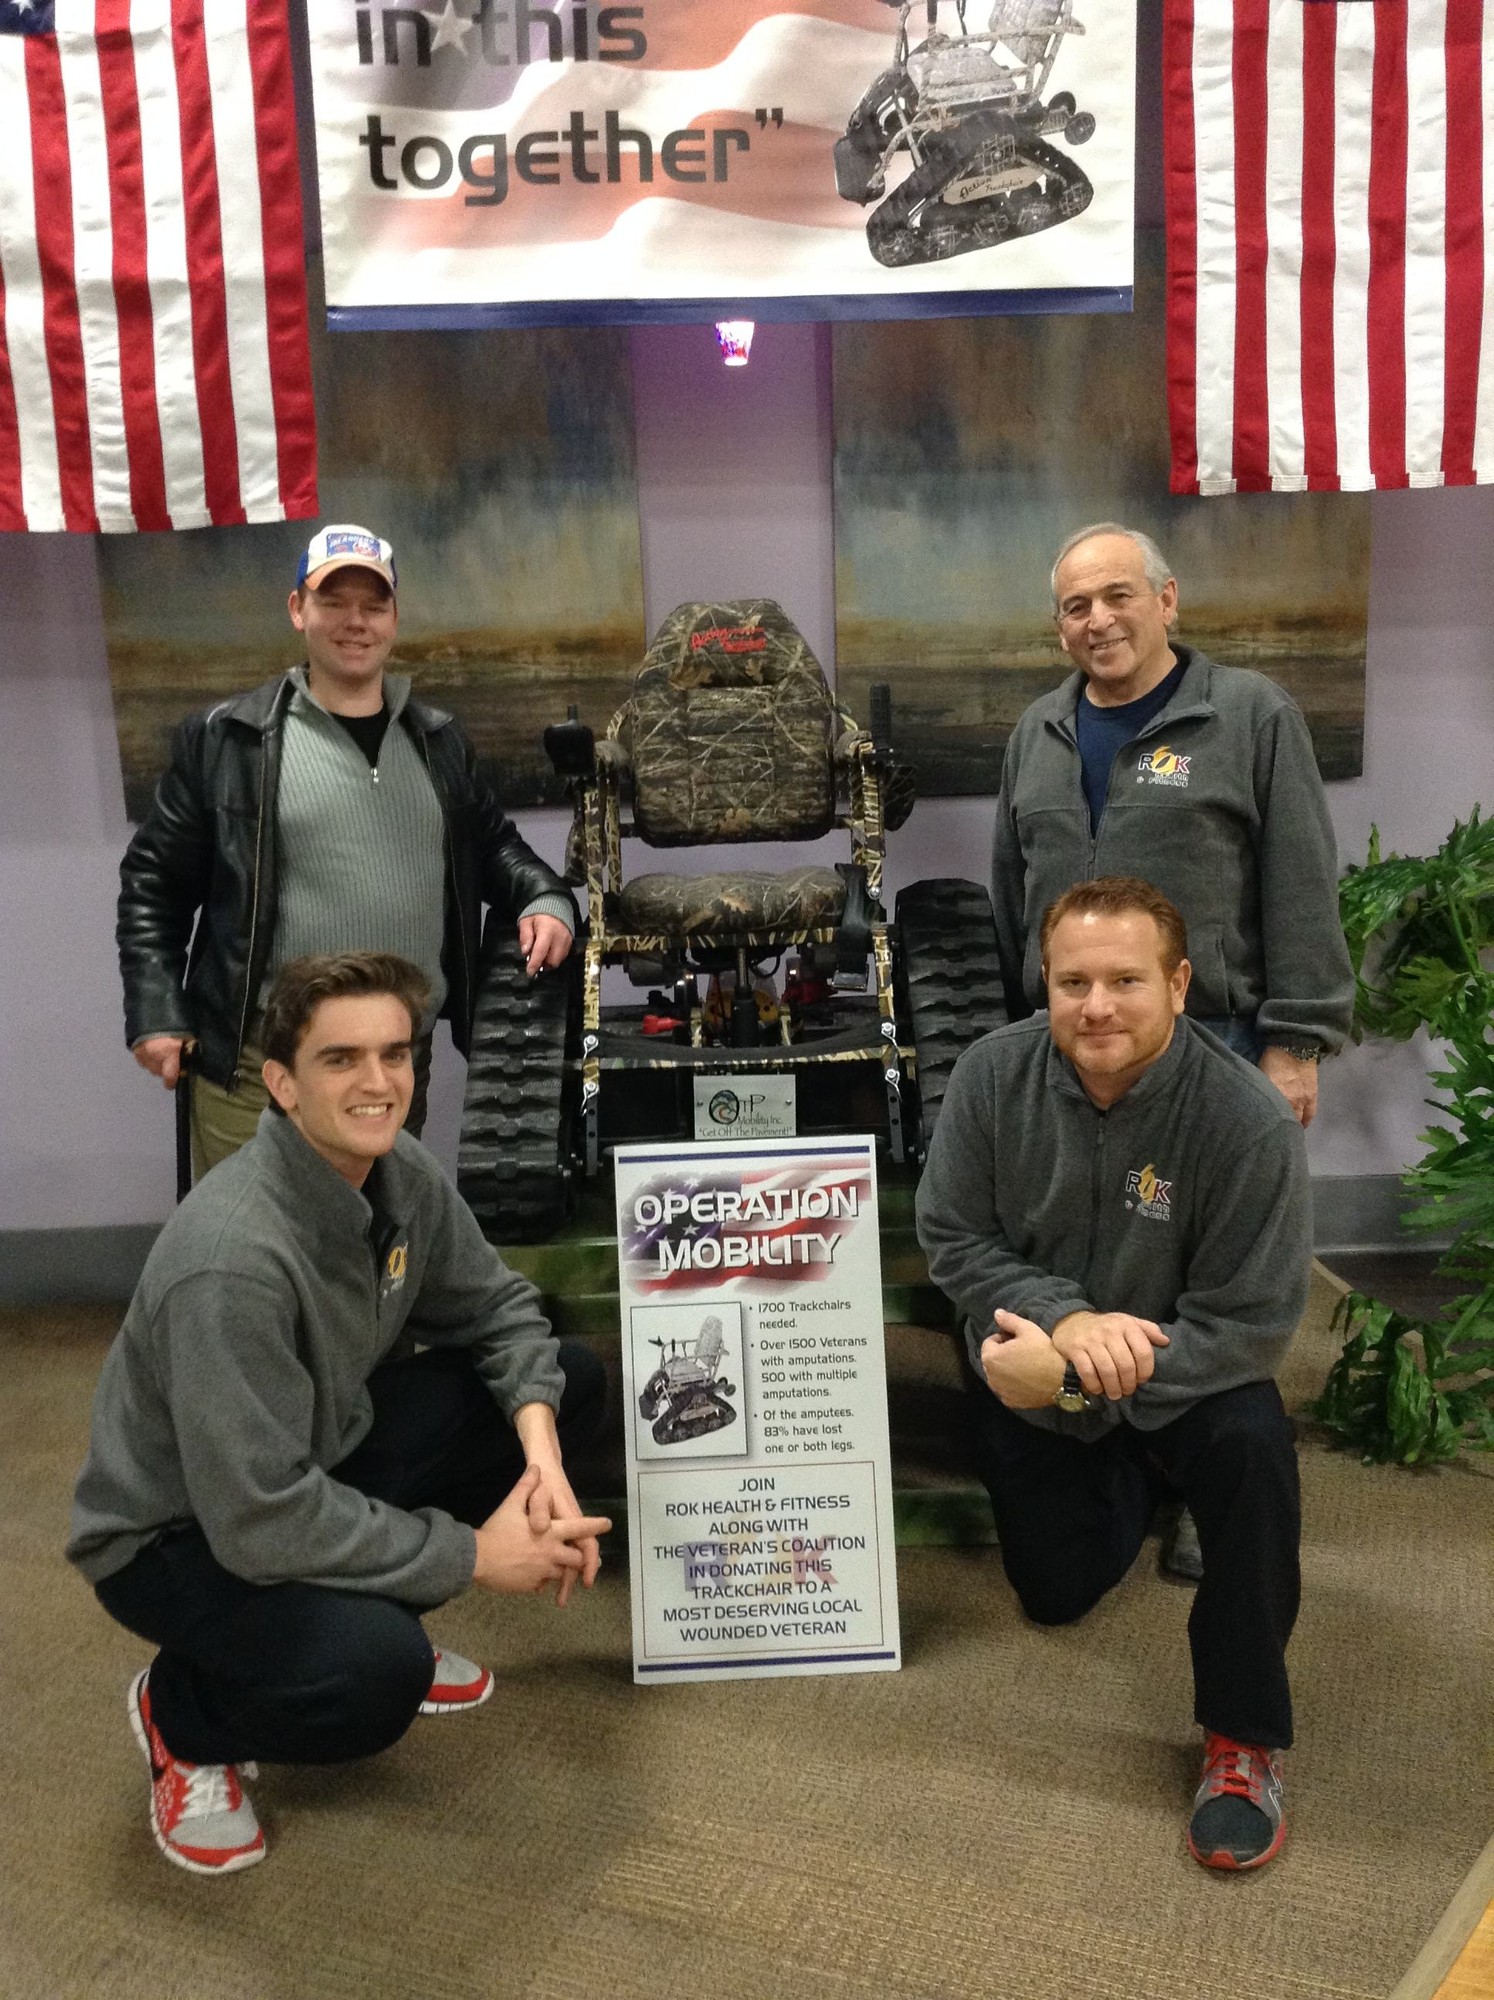 Wounded Veteran Chris Levi was the recipient of the Actiontrack Chair. He is pictured with co-owners Bob D'Urso, top right, Mike Hawksby, bottom right, and Director of Operations Craig D'Urso.